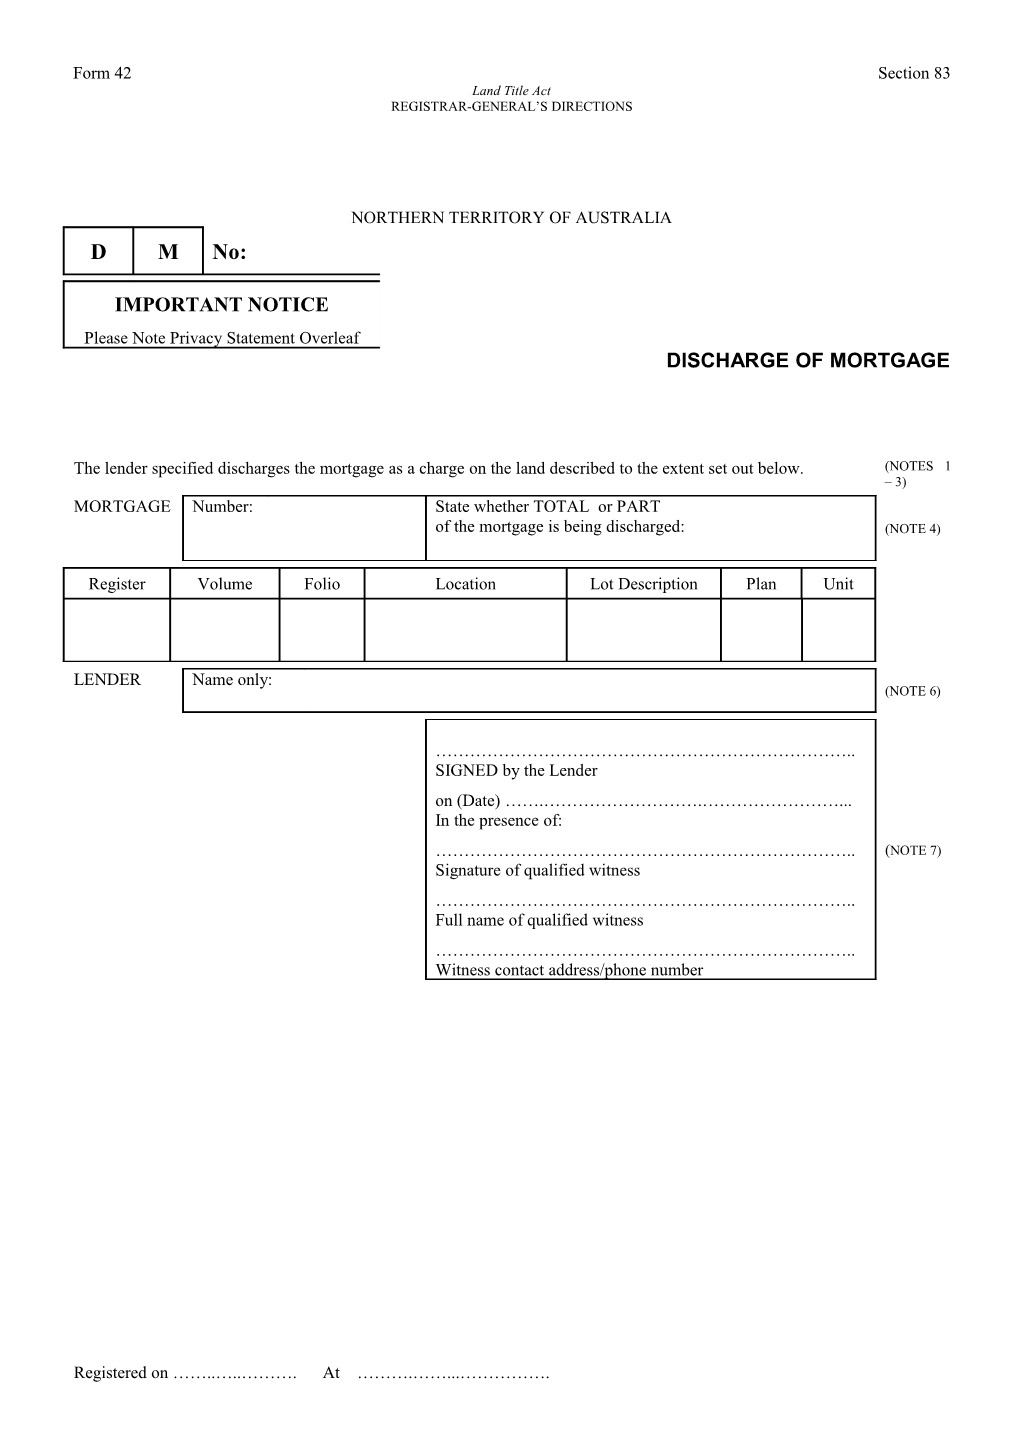 Form No. 42 - Discharge of Mortgage